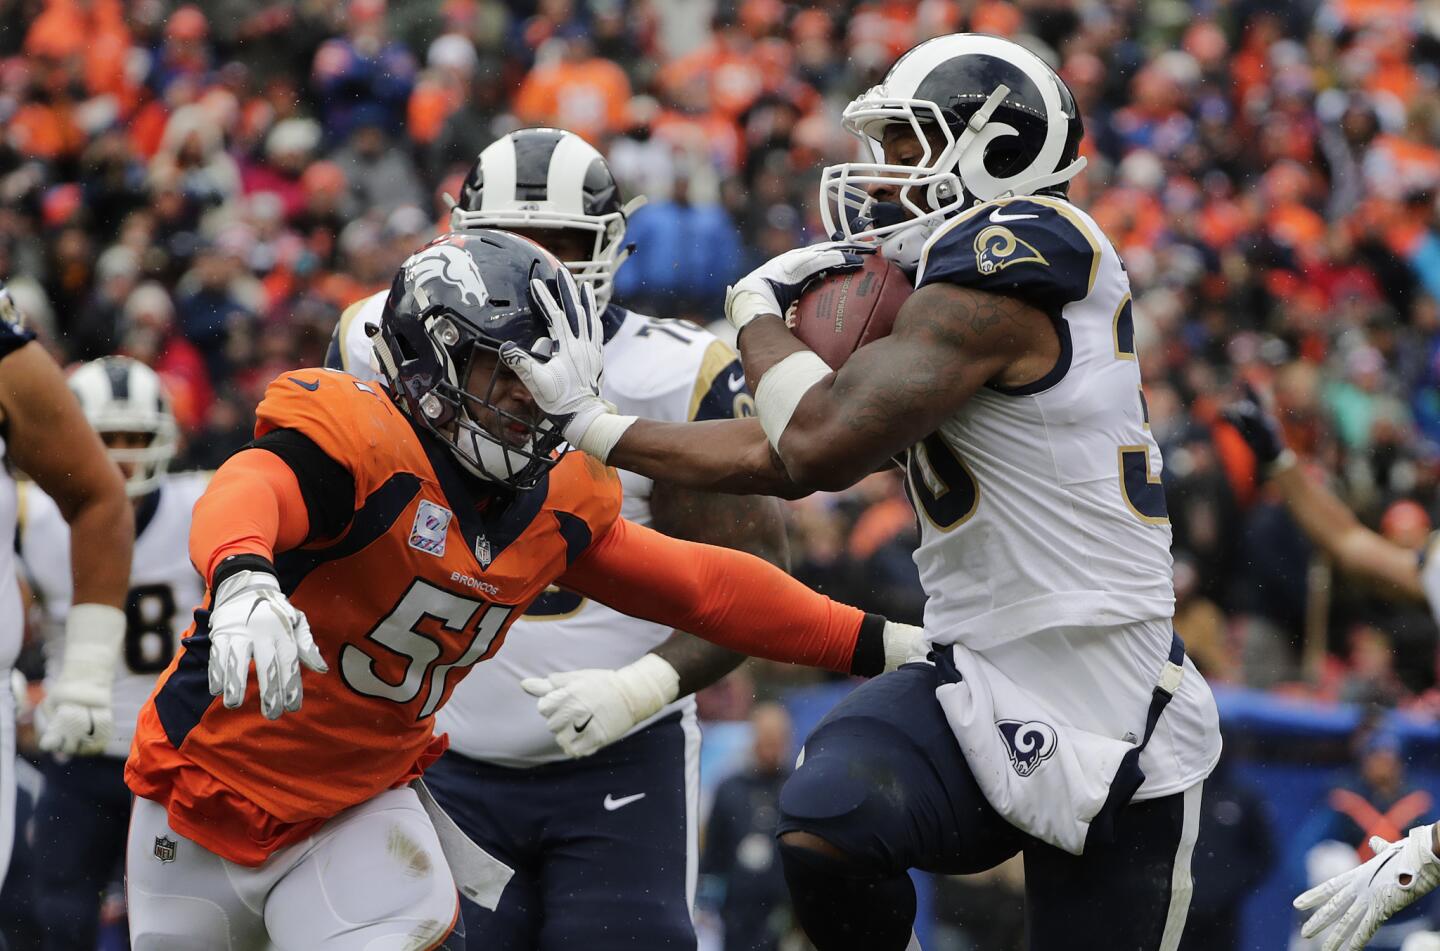 Rams running back Todd Gurley (30) keeps his hand on Denver Broncos linebacker Todd Davis (51) as he scores on a 4th and 1 play from the 10 yard line in the second quarter at Broncos Stadium at Mile High on Sunday.